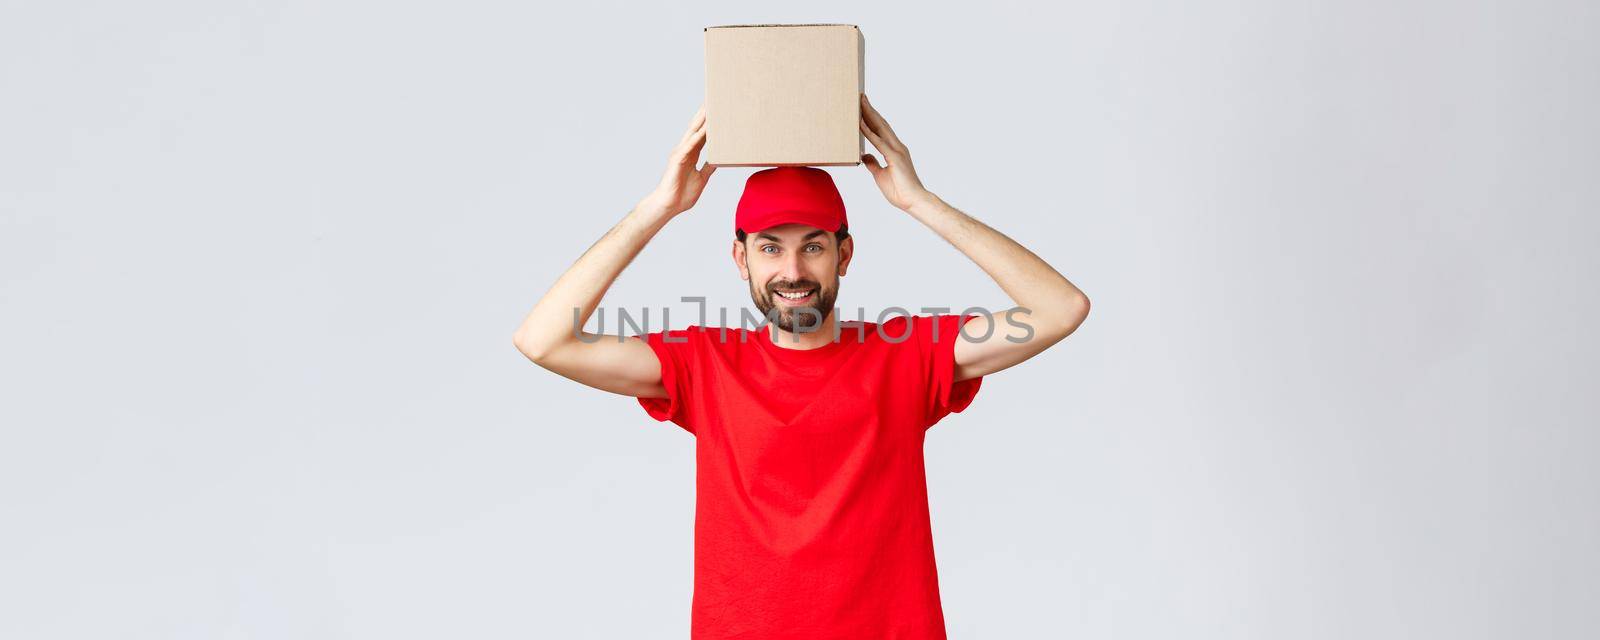 Order delivery, online shopping and package shipping concept. Funny and cute bearded courier in red uniform cap and t-shirt, holding box on head. Employee with package smiling.